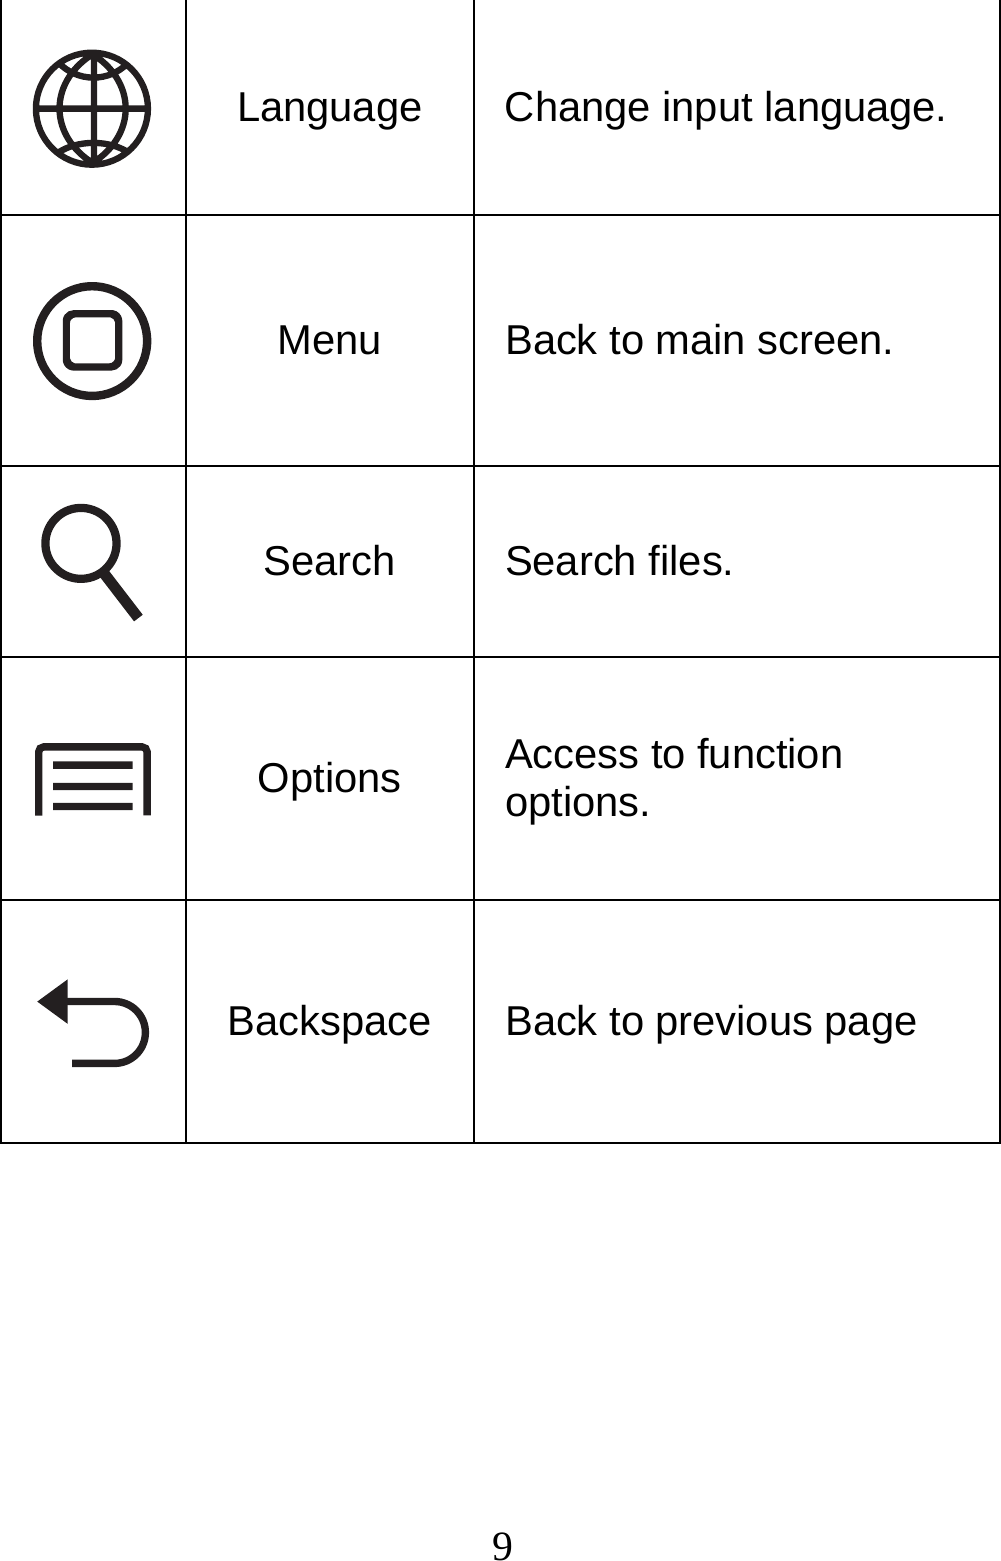  9 Language  Change input language.  Menu  Back to main screen.  Search Search files.  Options  Access to function options.  Backspace  Back to previous page     